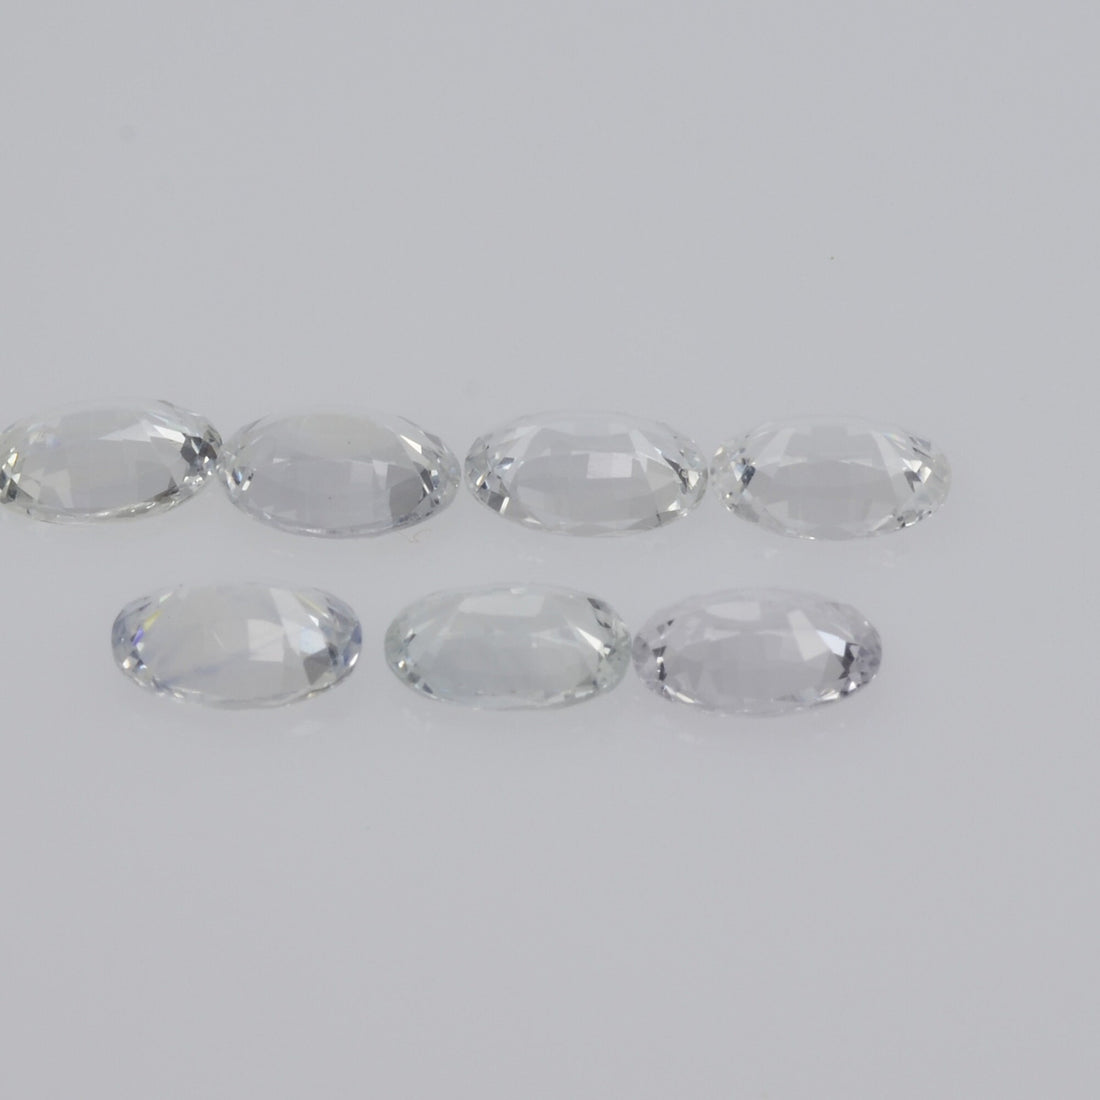 7x5 mm Natural Calibrated White Sapphire Loose Gemstone Oval Cut